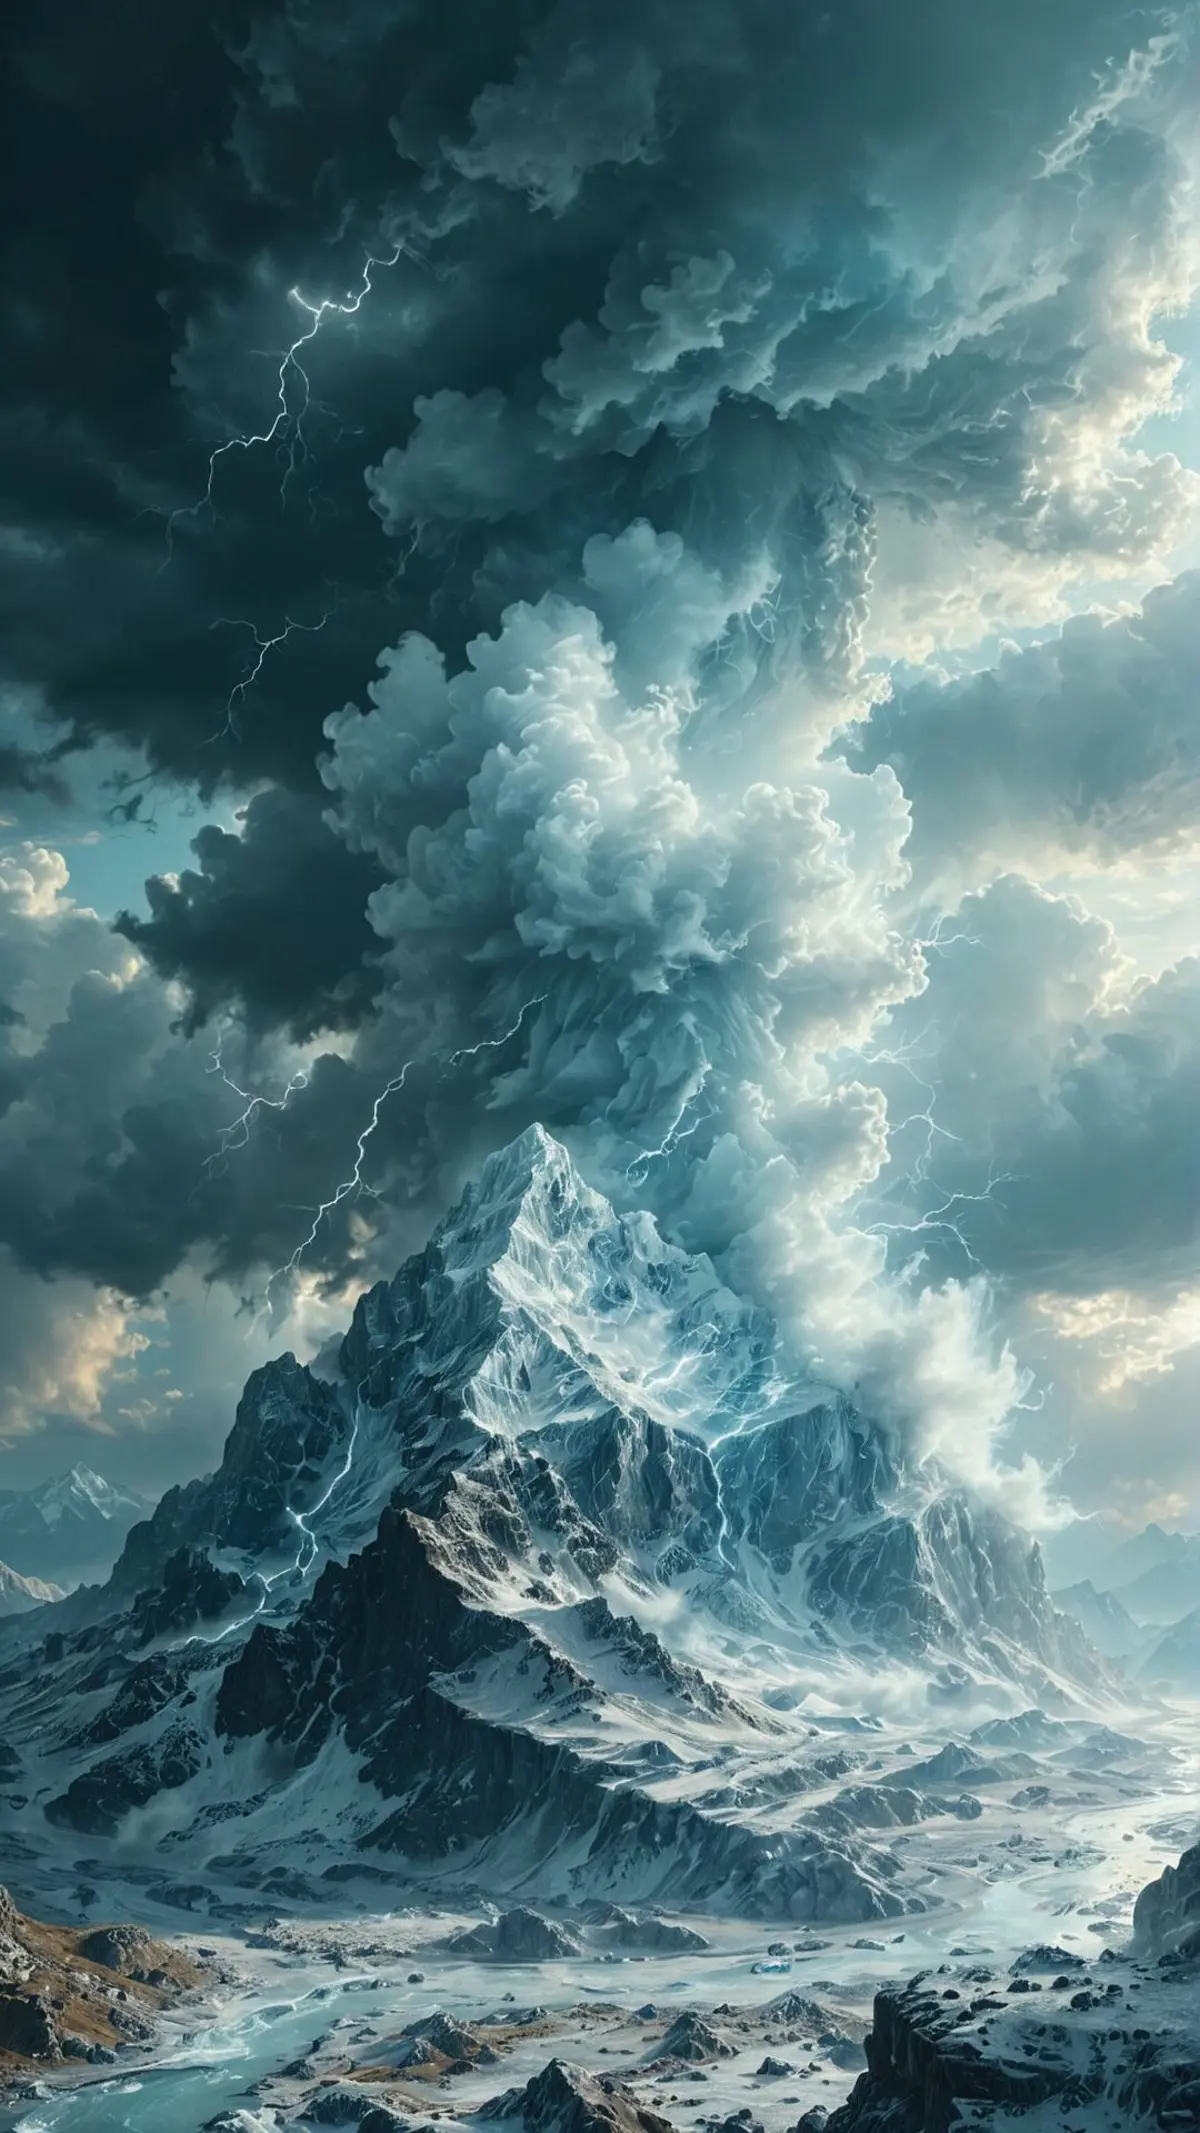 A towering mountain with sharp, snow-covered peaks piercing through a tumultuous sky filled with dark, swirling clouds. Powerful lightning bolts cuts through the scene, adding a sense of raw energy and natural power to the already intense atmosphere of the setting. 